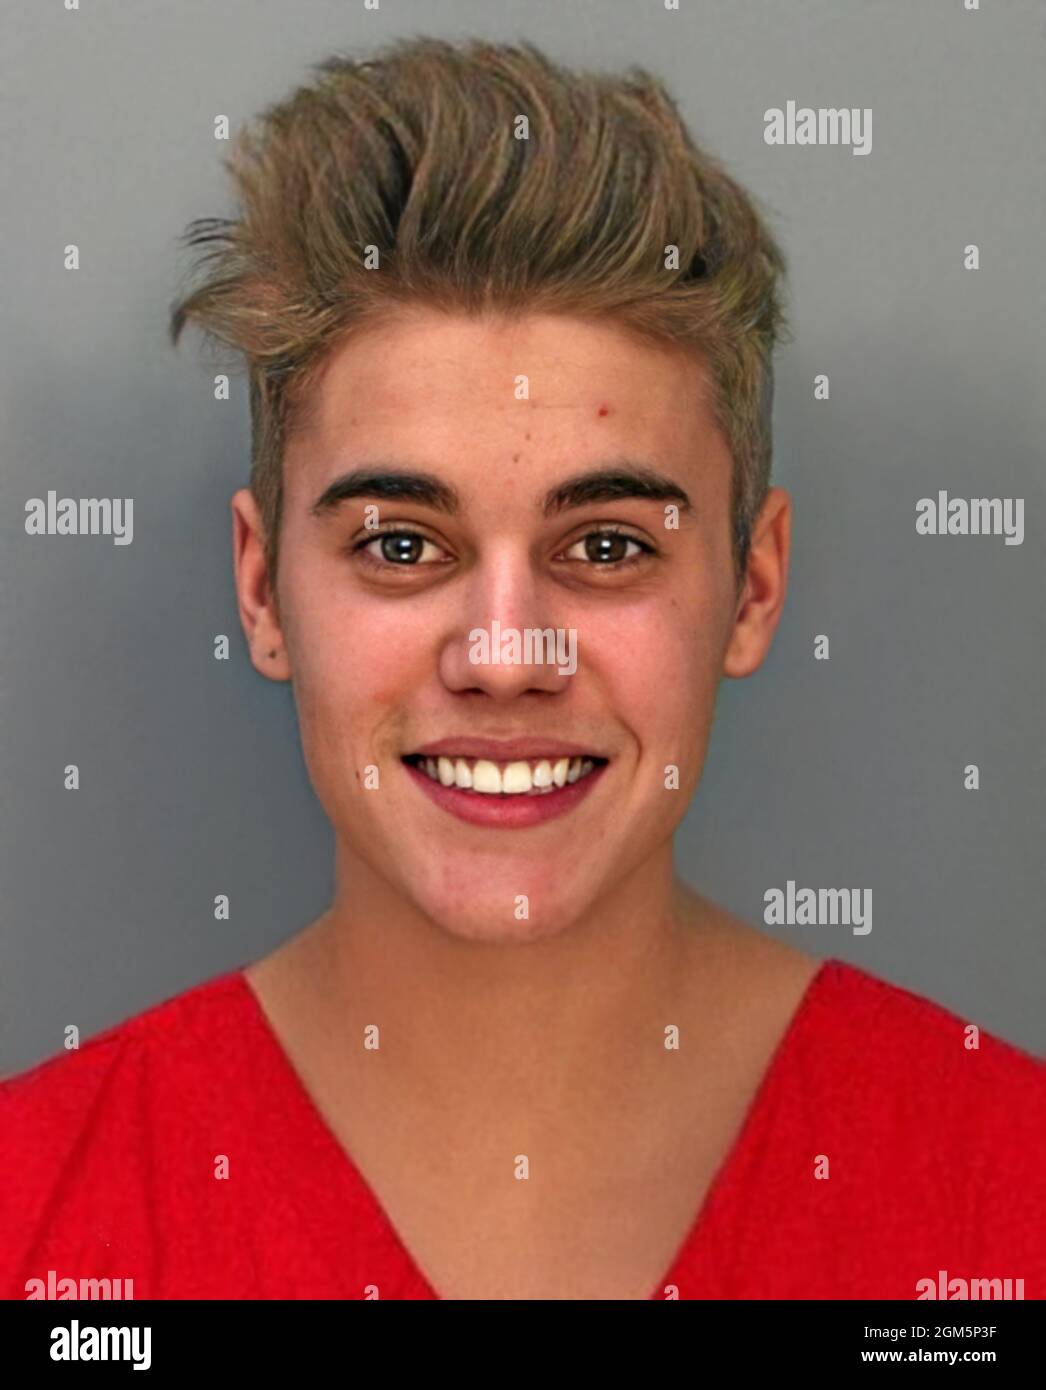 2014, 23 january , MIAMI BEACH , FLORIDA , USA : The celebrated canadian-born Pop Star singer JUSTIN BIEBER ( born 1 march 1994 ) when was arrested by Police Department in the official mugshot by police in Miami Beach, Florida. Bieber was arrested for driving under the influence, resisting arrest and driving without a valid driver's license.  Unknown photographer by Miami Beach Police Department . - Mug sghot - MUG-SHOT - HISTORY - FOTO STORICHE  - MUSIC - MUSICA - cantante - COMPOSITORE - ROCK STAR - ARRESTO - Arrestation - ARRESTATO DALLA POLIZIA - FOTO SEGNALETICA - mugshot - mug shot - reb Stock Photo